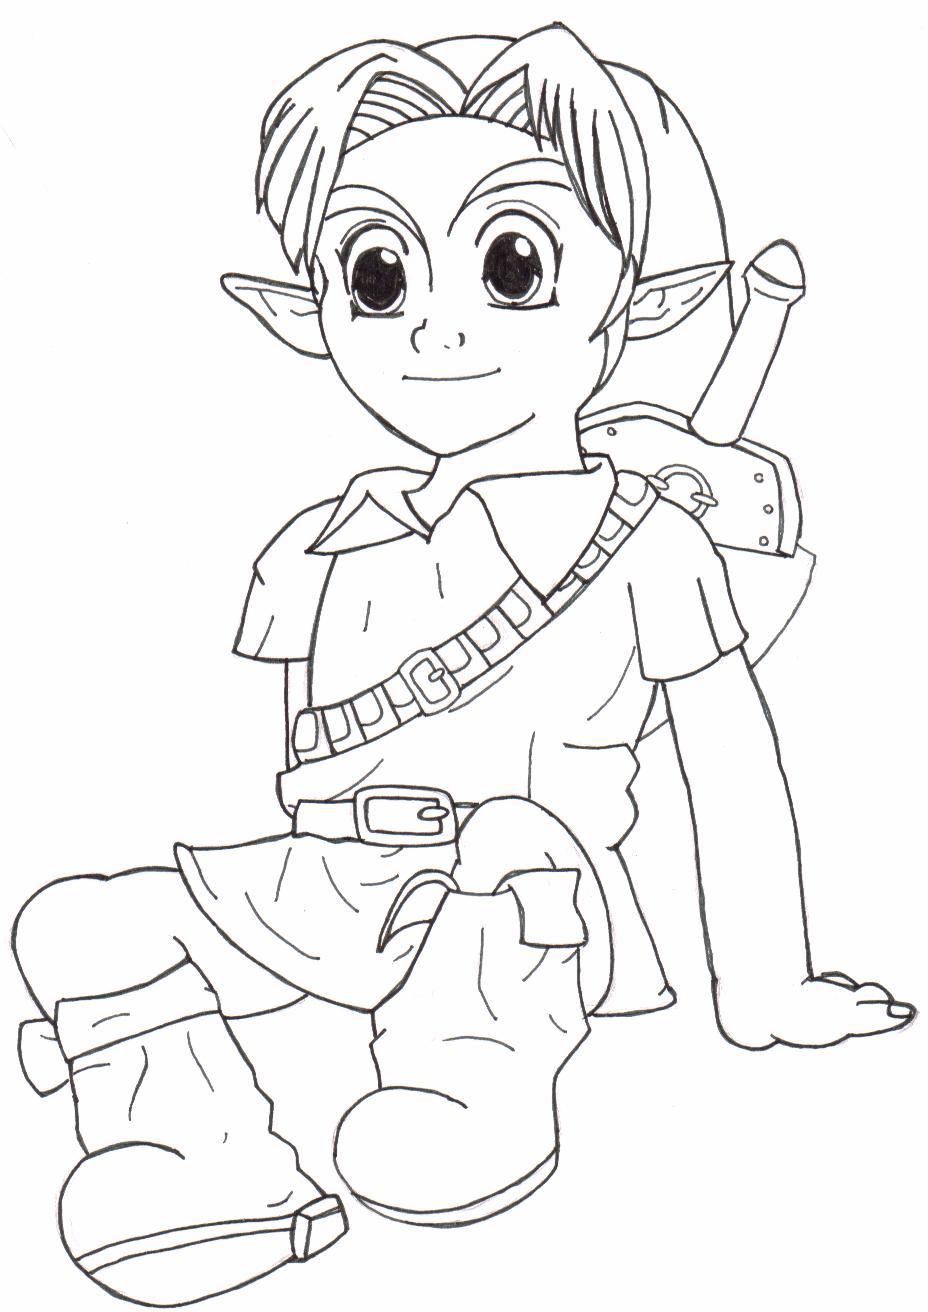 Young Link by Linkfreak04